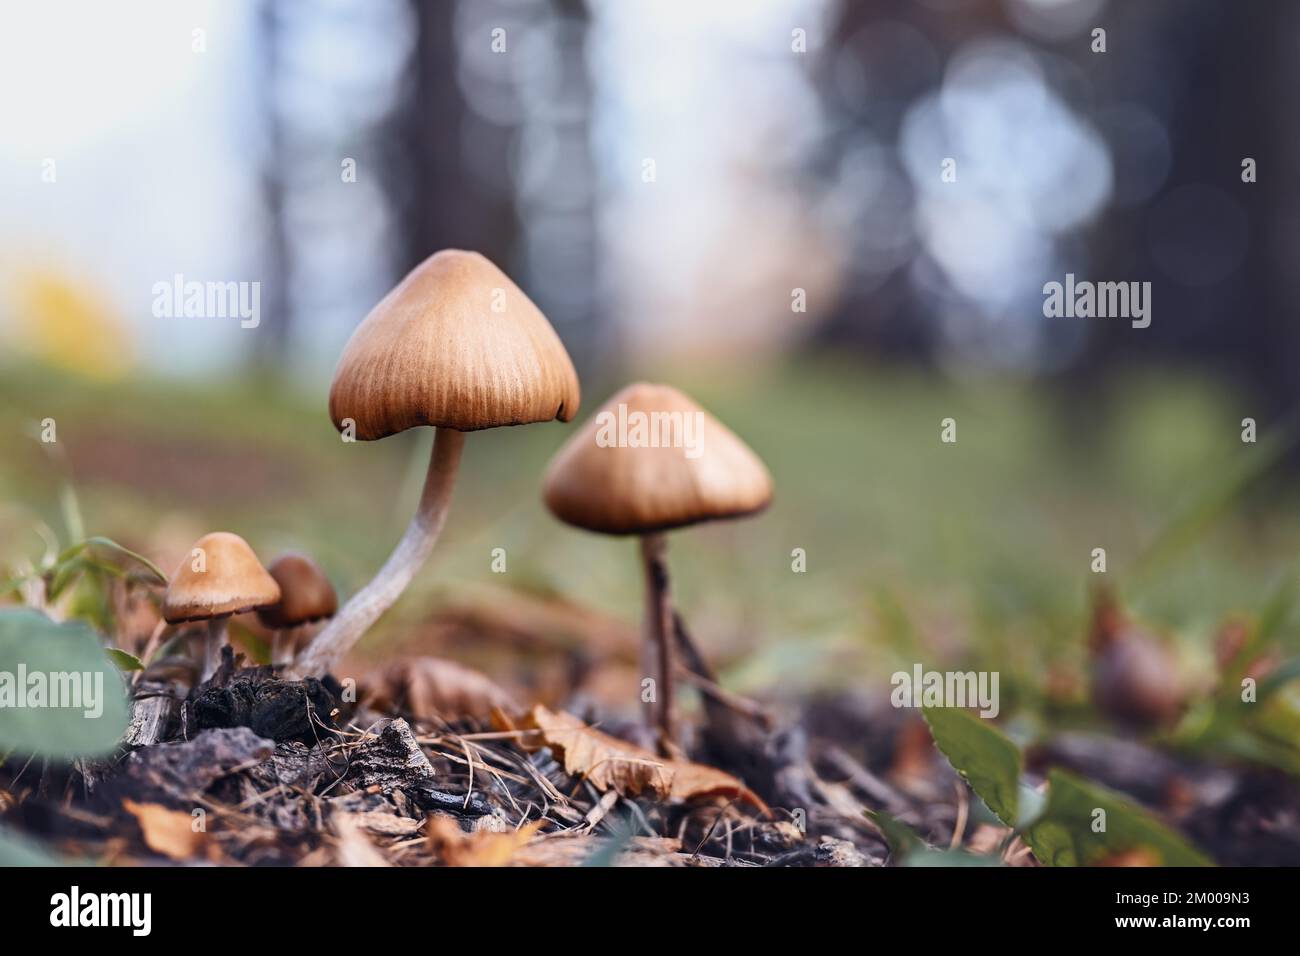 Autumn background. Large and small mushrooms (family of mushrooms) in the autumn forest. Place for text. Stock Photo